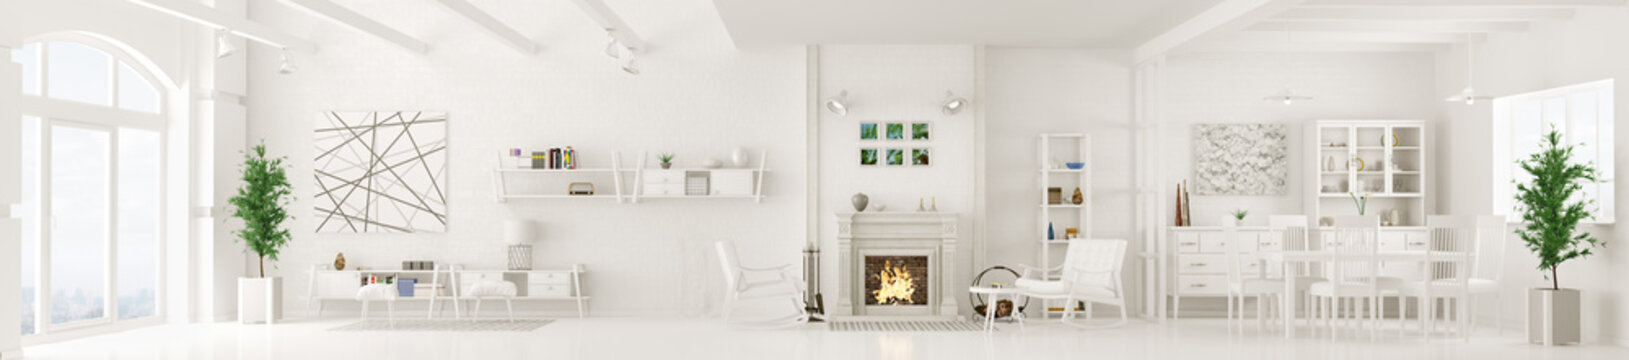 Interior of white living room panorama 3d rendering